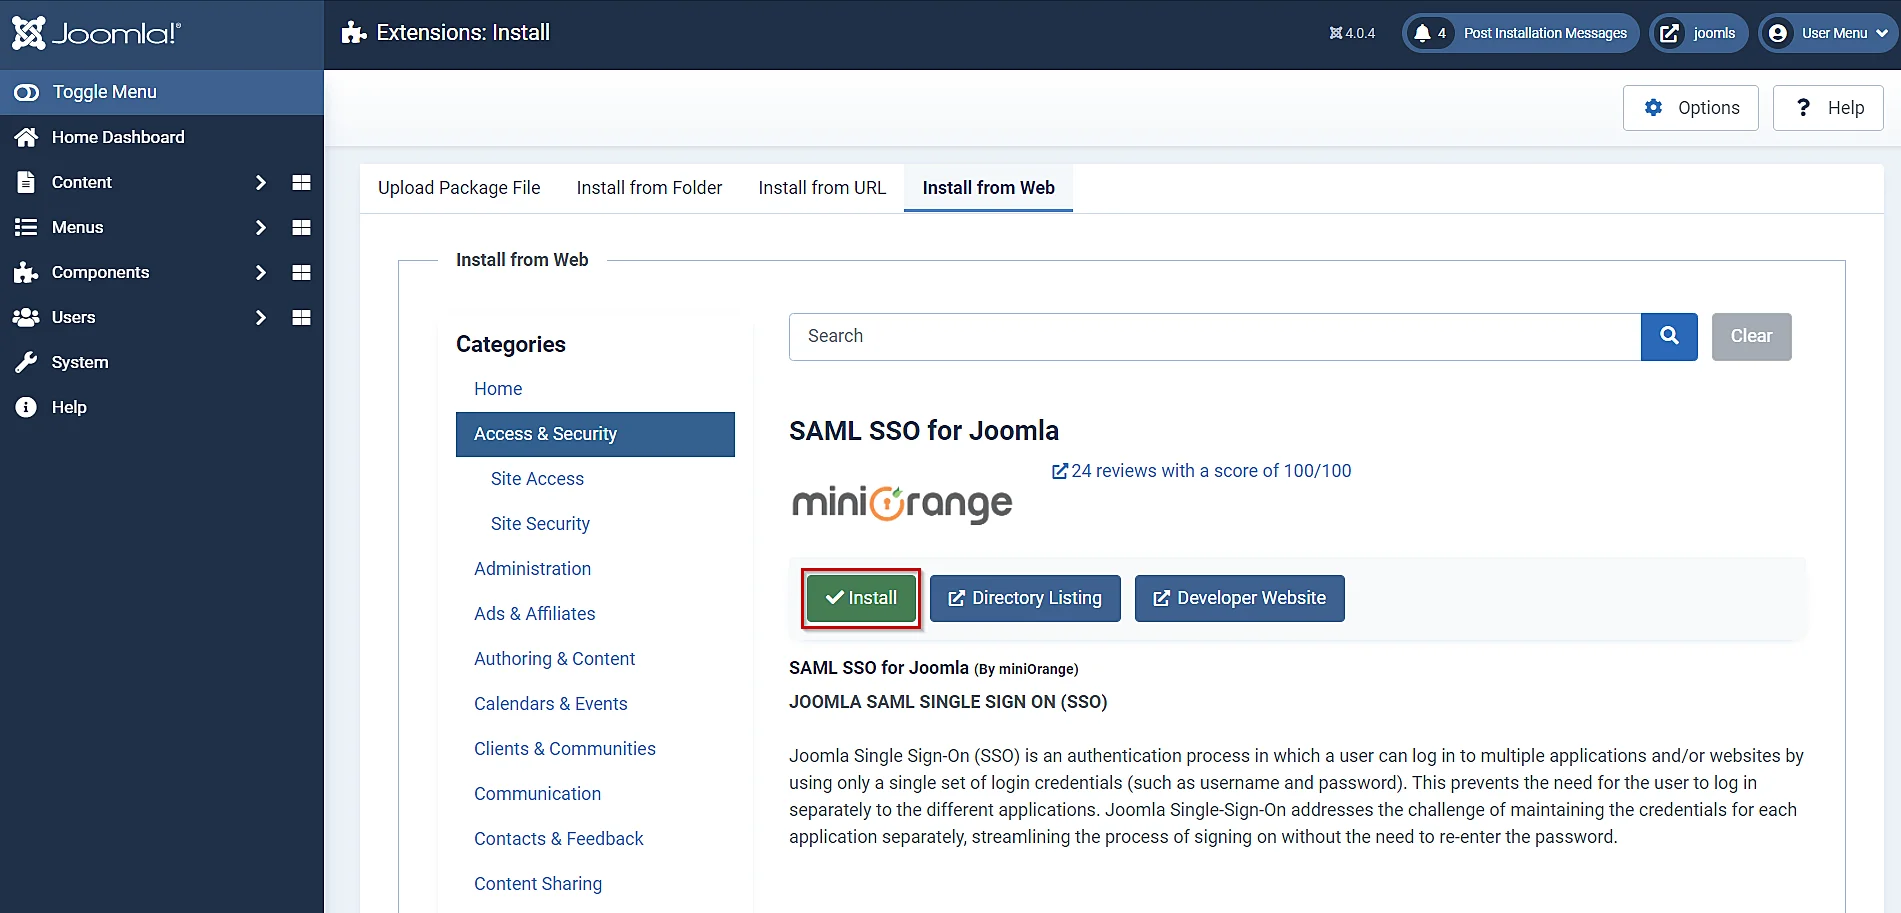 SAML Single Sign-On (SSO) using Joomla (SP), click on install button to enable the plugin